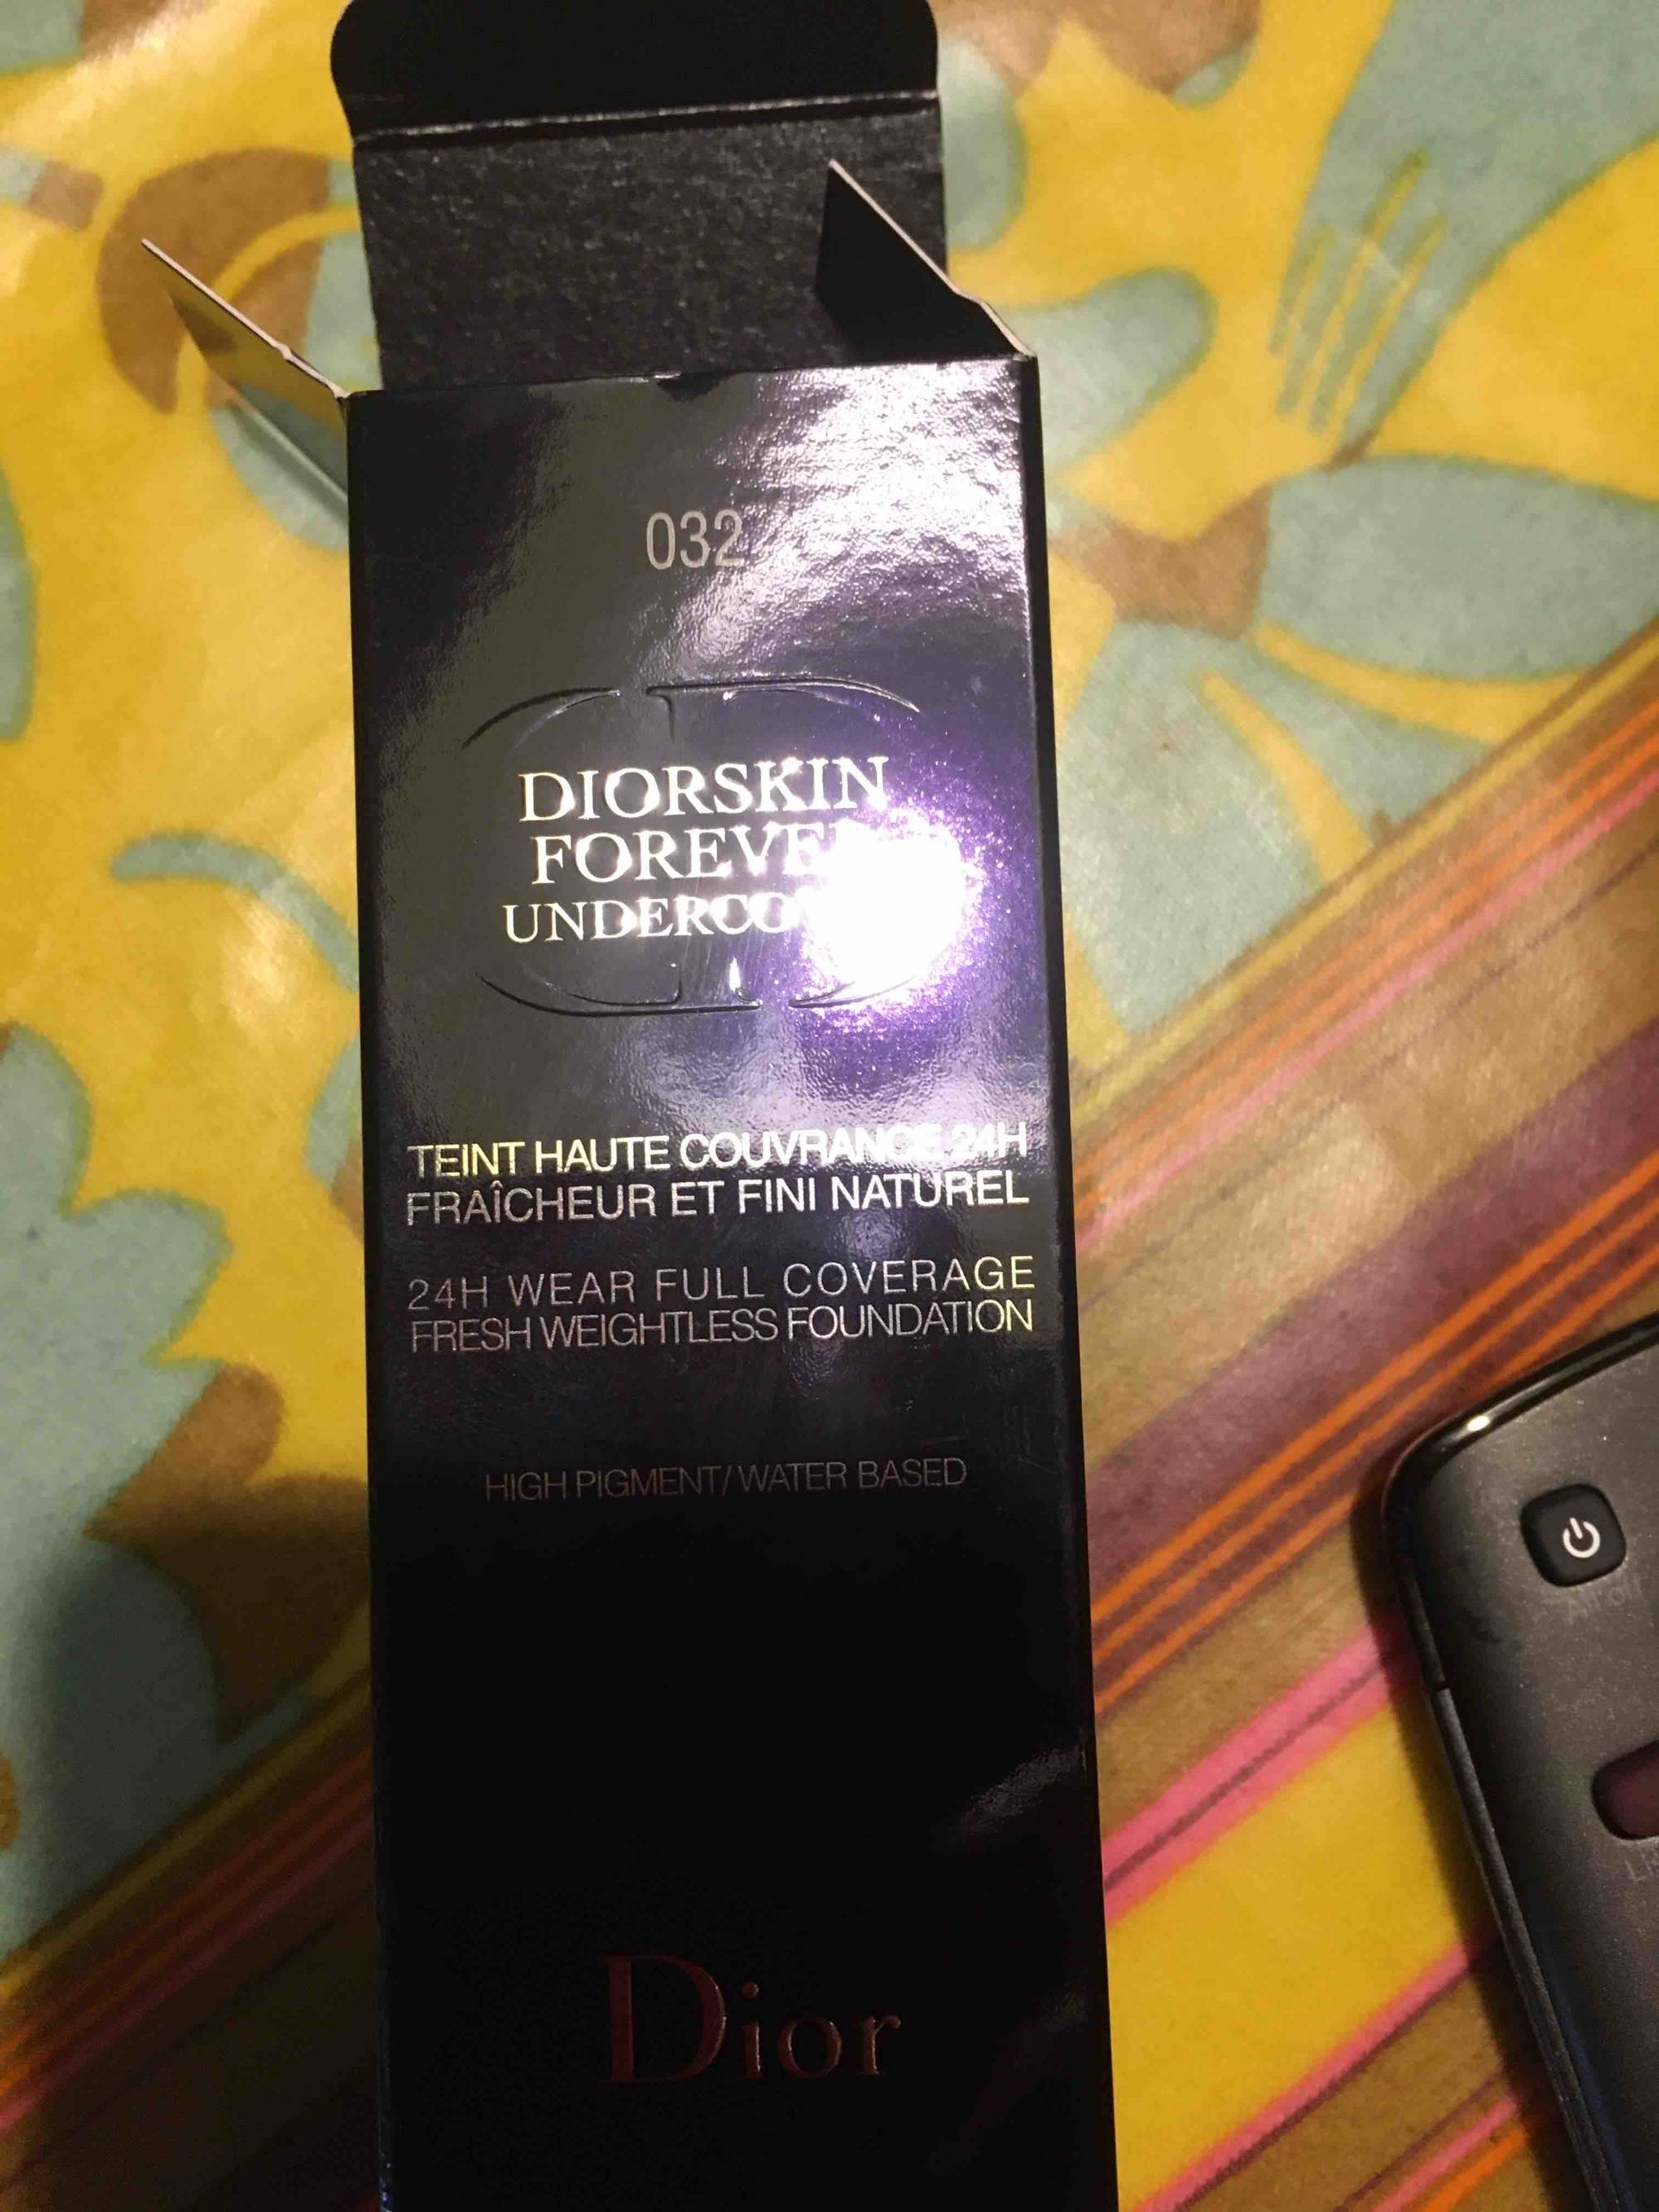 DIOR - Diorskin forever undercover - Teint haute couvrance 24h